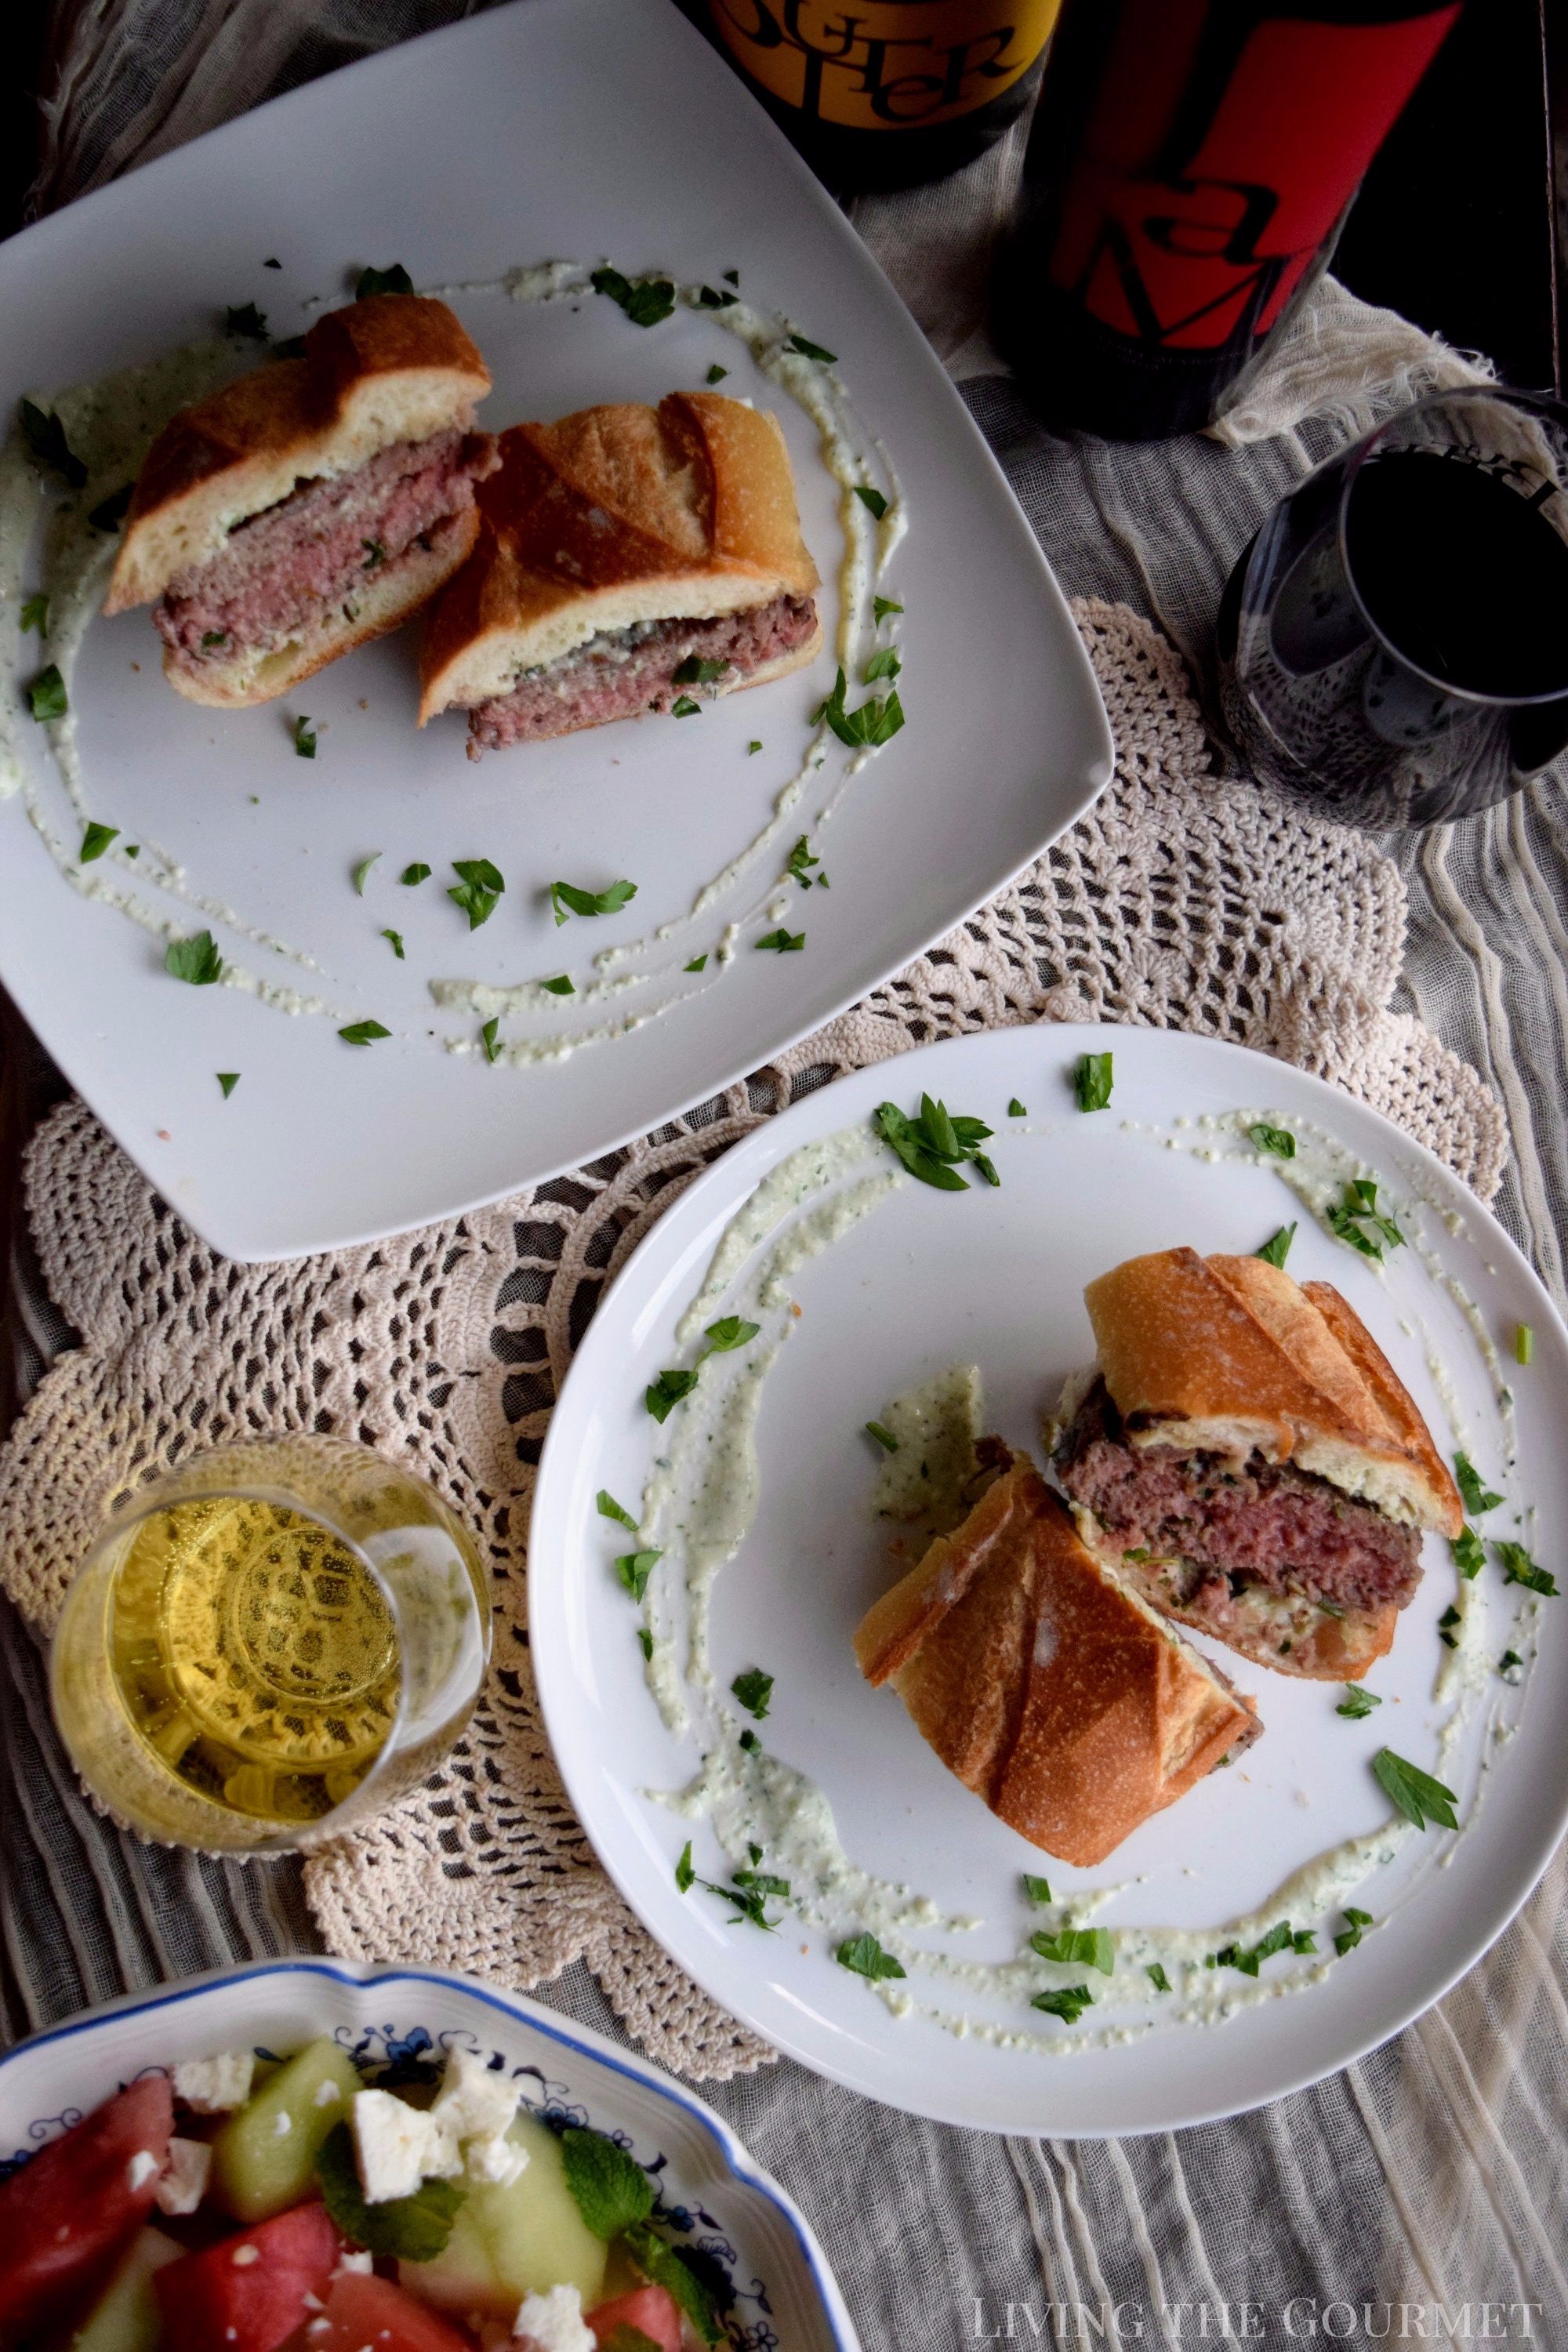 Living the Gourmet: Give summer a proper send off with these juicy Lamb Burgers paired alongside a glass of JaM Cellars | #JaMwinetime #ad